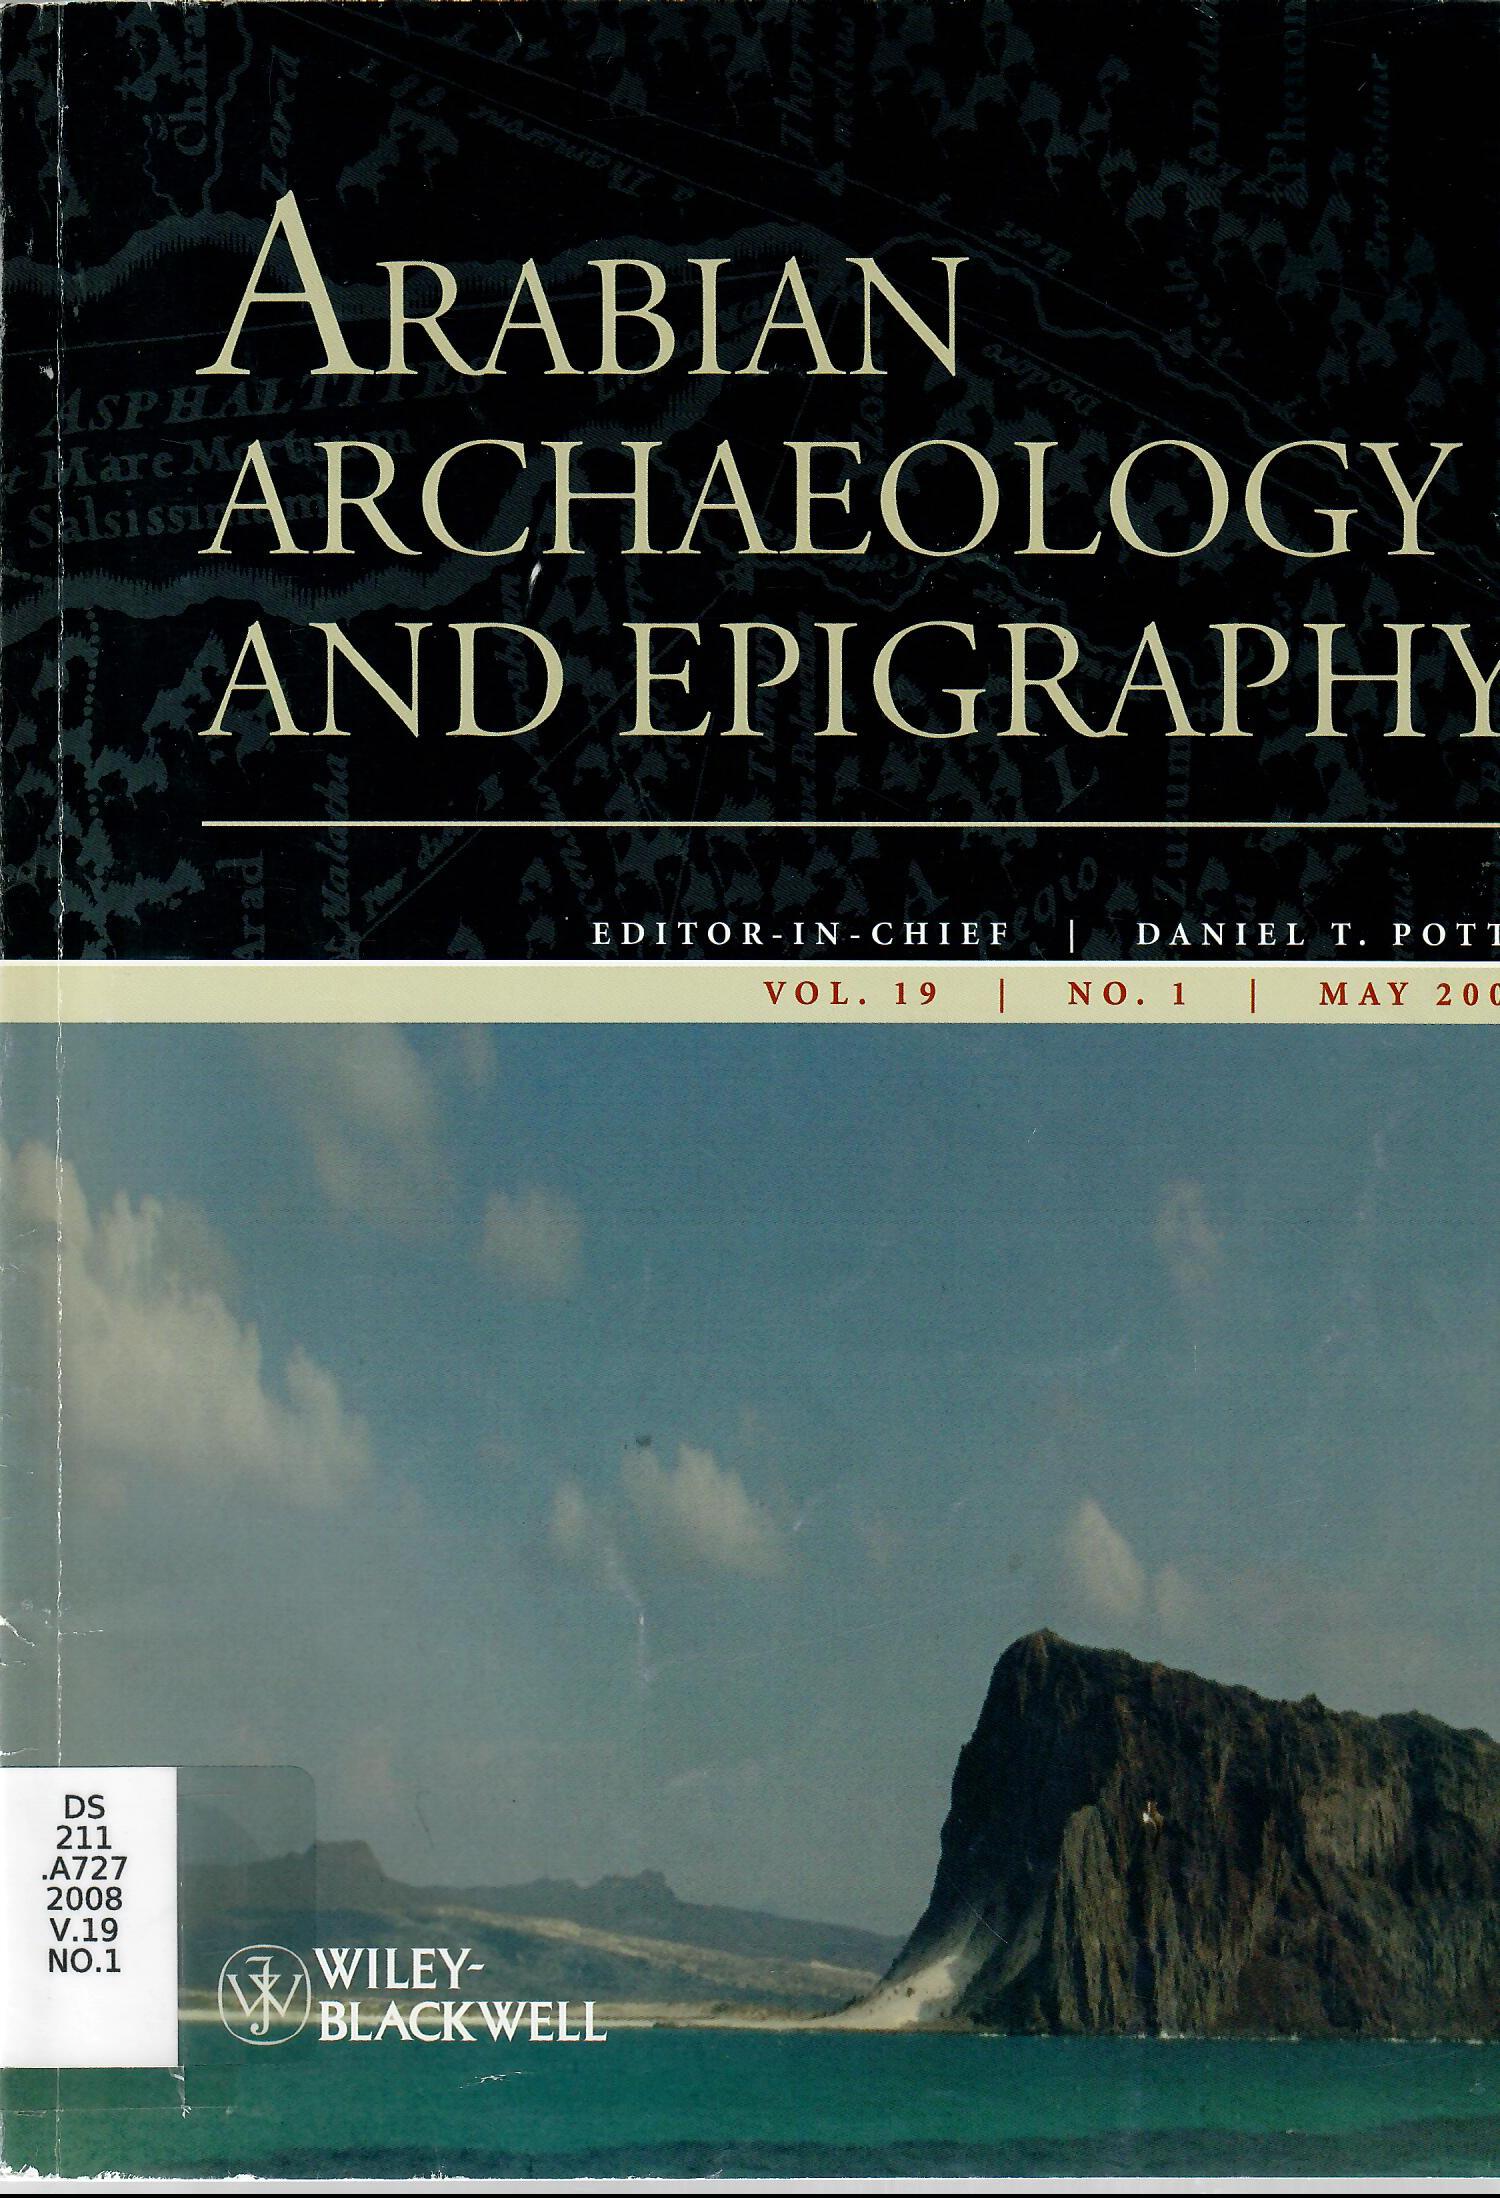 ARABIAN ARCHAEOLOGY AND EPIGRAPHY VOL.19  NO.1